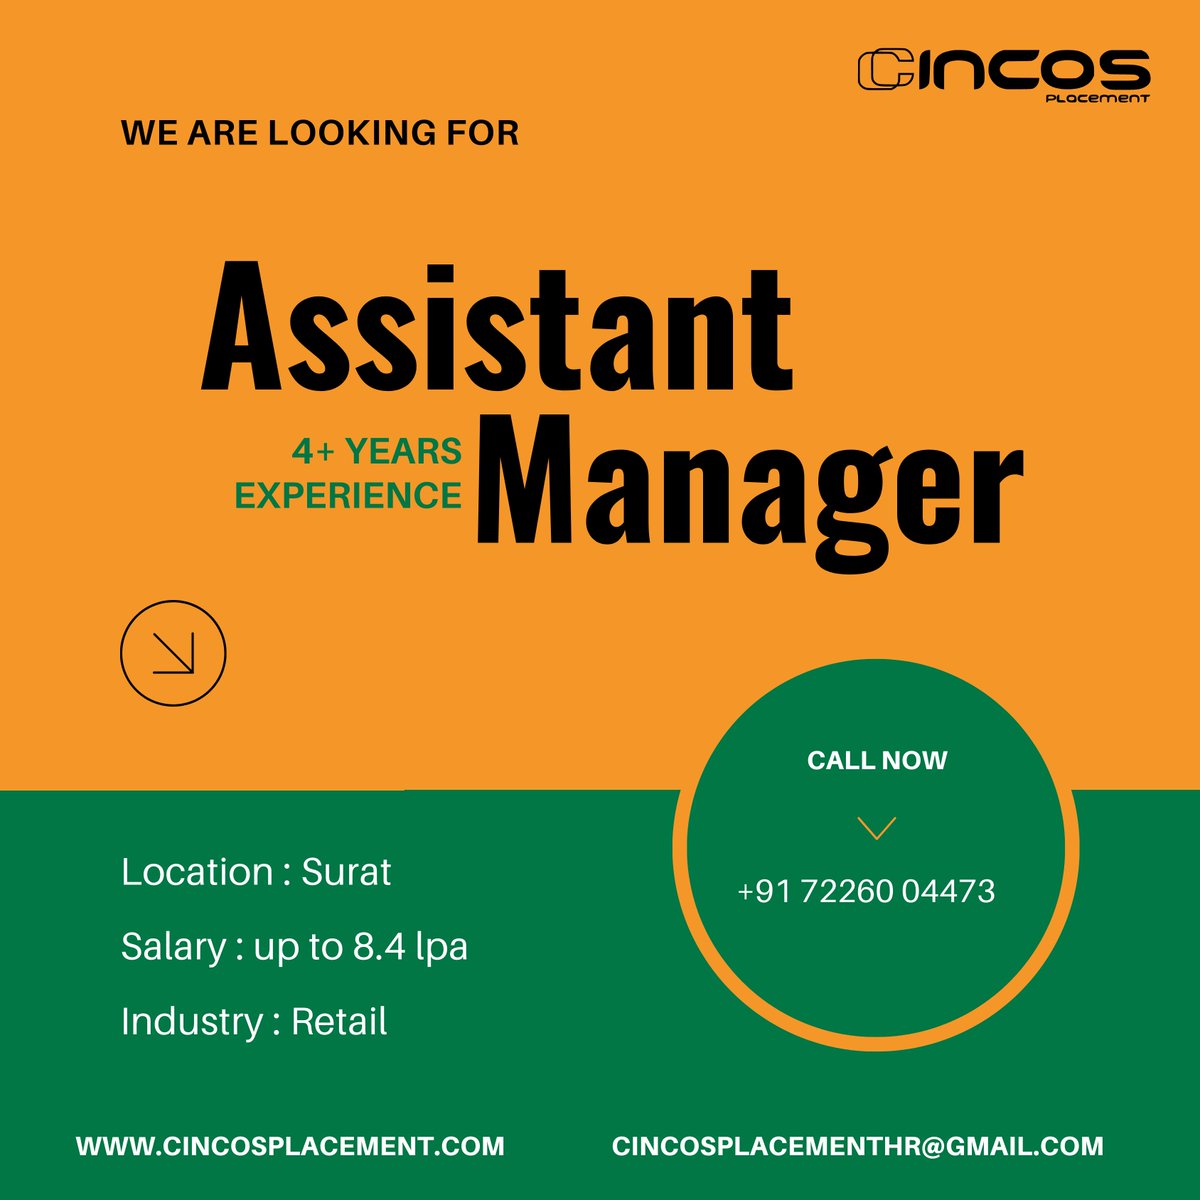 Calling all Assistant Managers! Explore a rewarding career with the Best Job Placement Consultancy in Surat. 

📞 Call Now: +91 7226004473
📧 Send CV: cincosplacementhr@gmail.com

#AssistantManager #SuratJobs #BestHumanResourceCompaniesInSurat #TopHumanResourceCompaniesInSurat